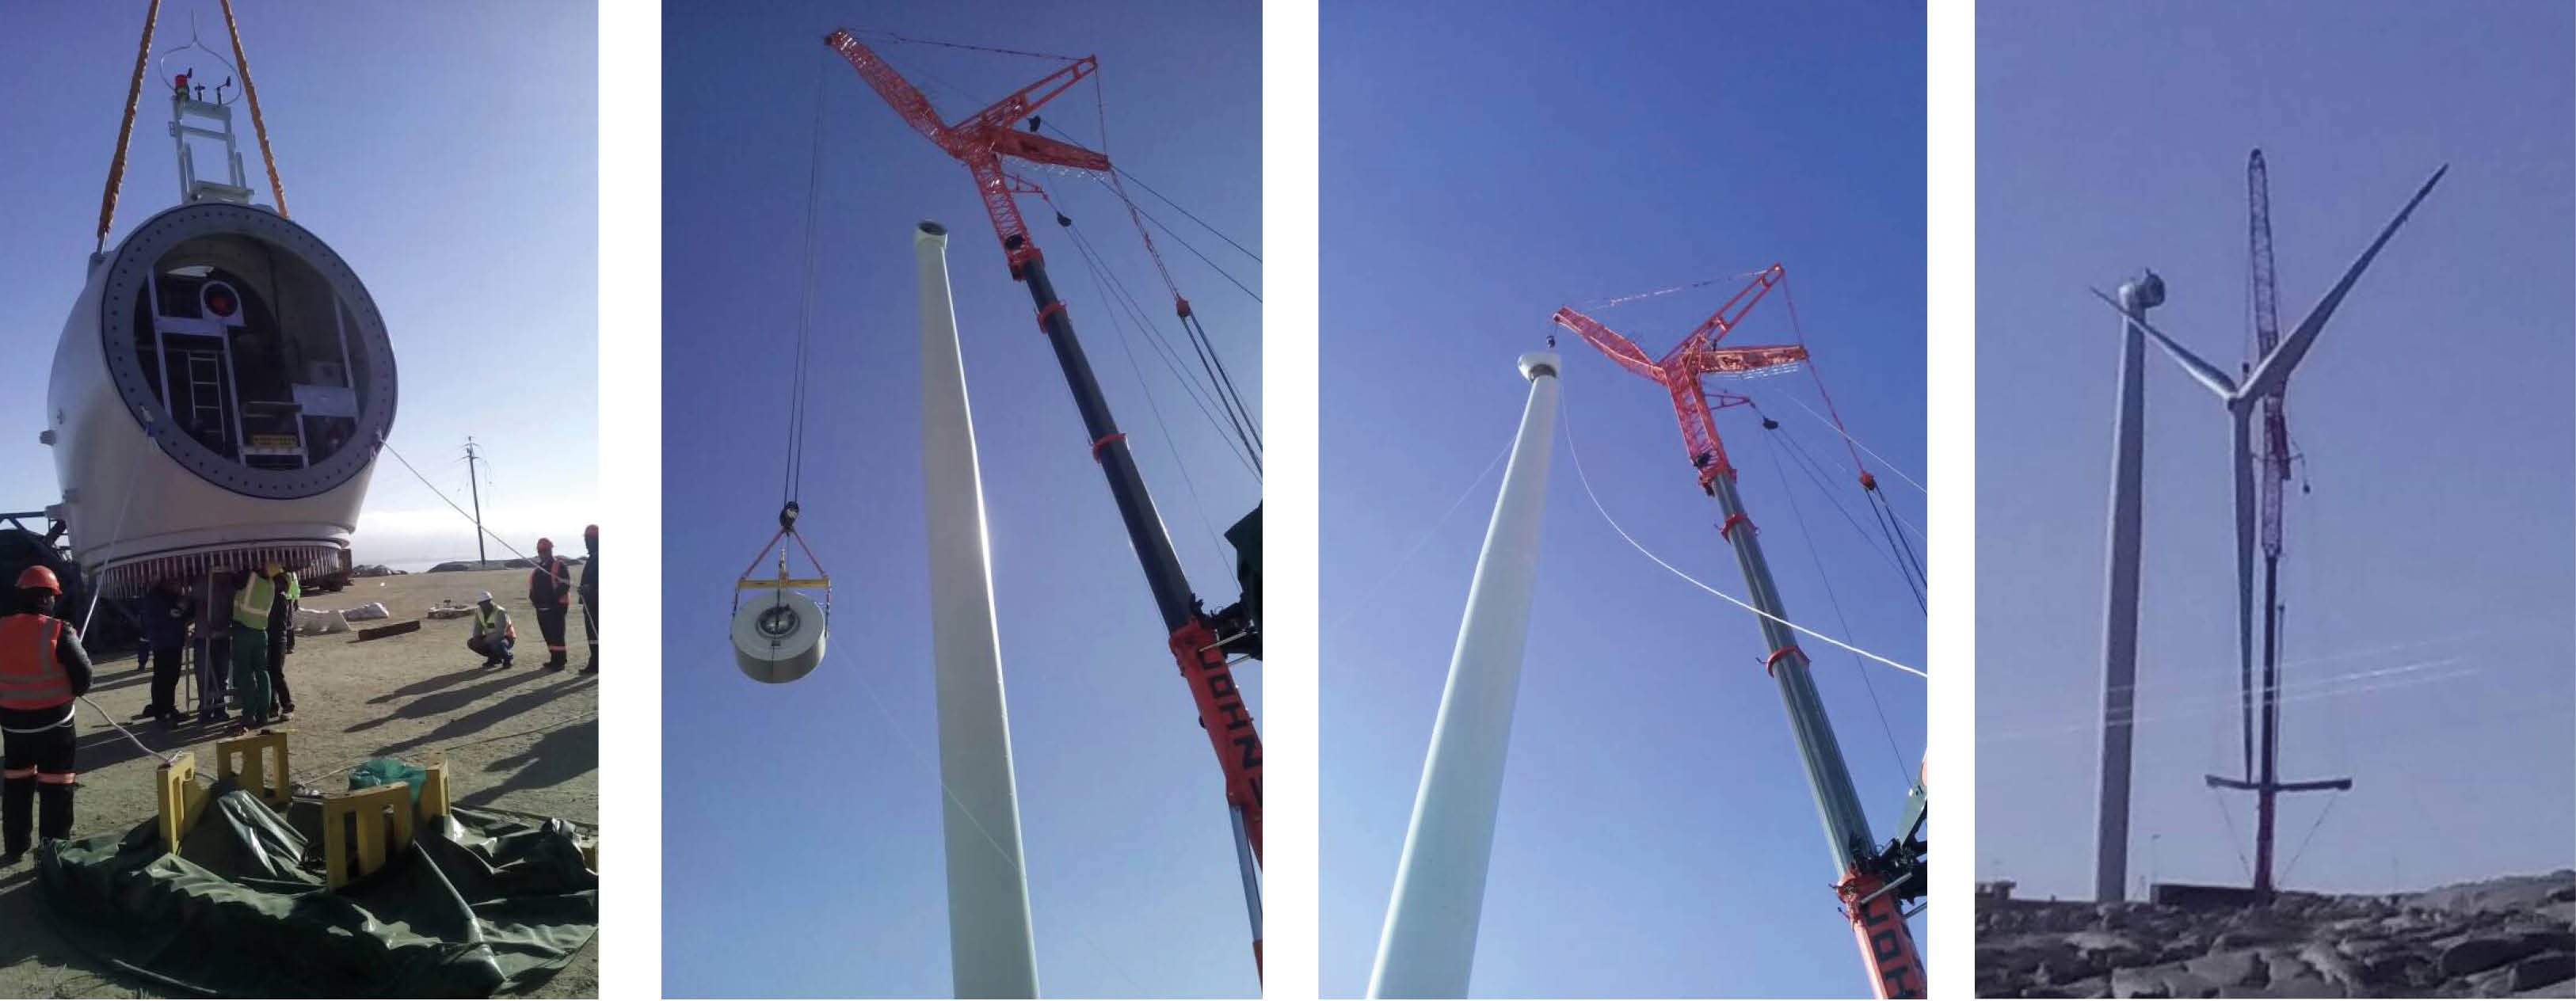 Built on Penetron: Each of the Ombepo Wind Farm turbines stands 80 m (over 260-feet) tall, with three blades and a single generator, all secured to a PENETRON ADMIX-treated concrete foundation.